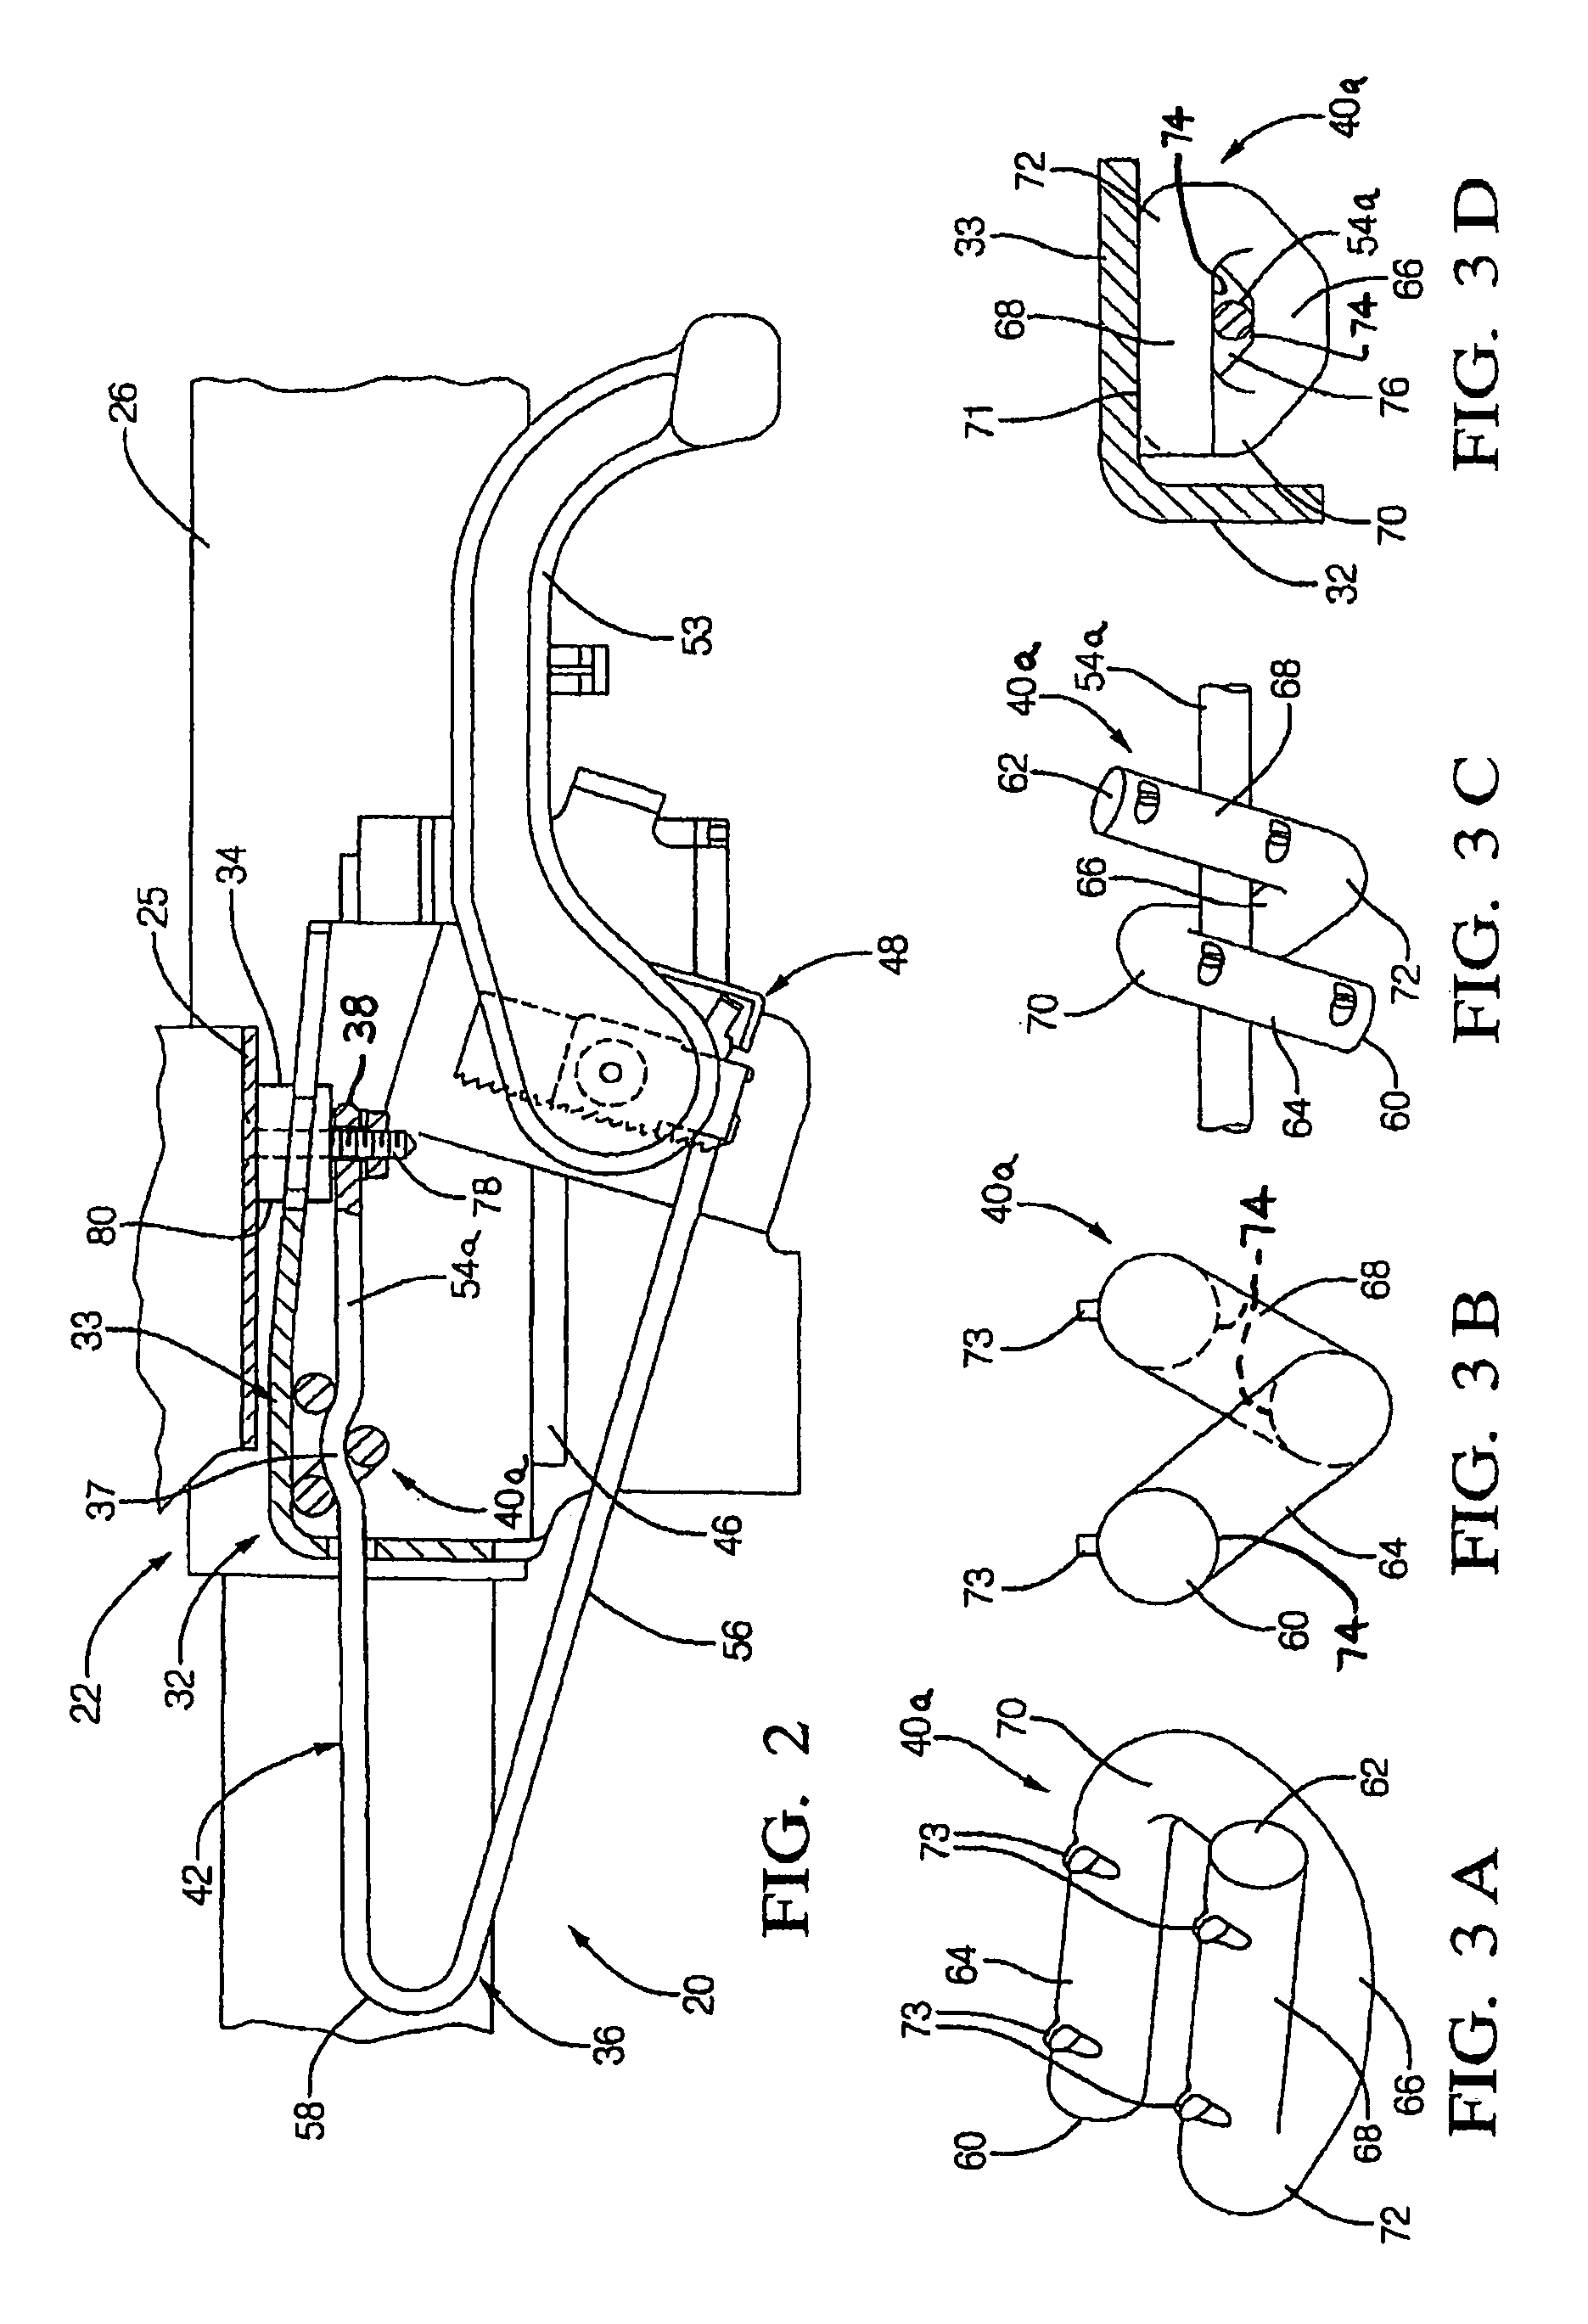 Energy absorbing steering column assembly